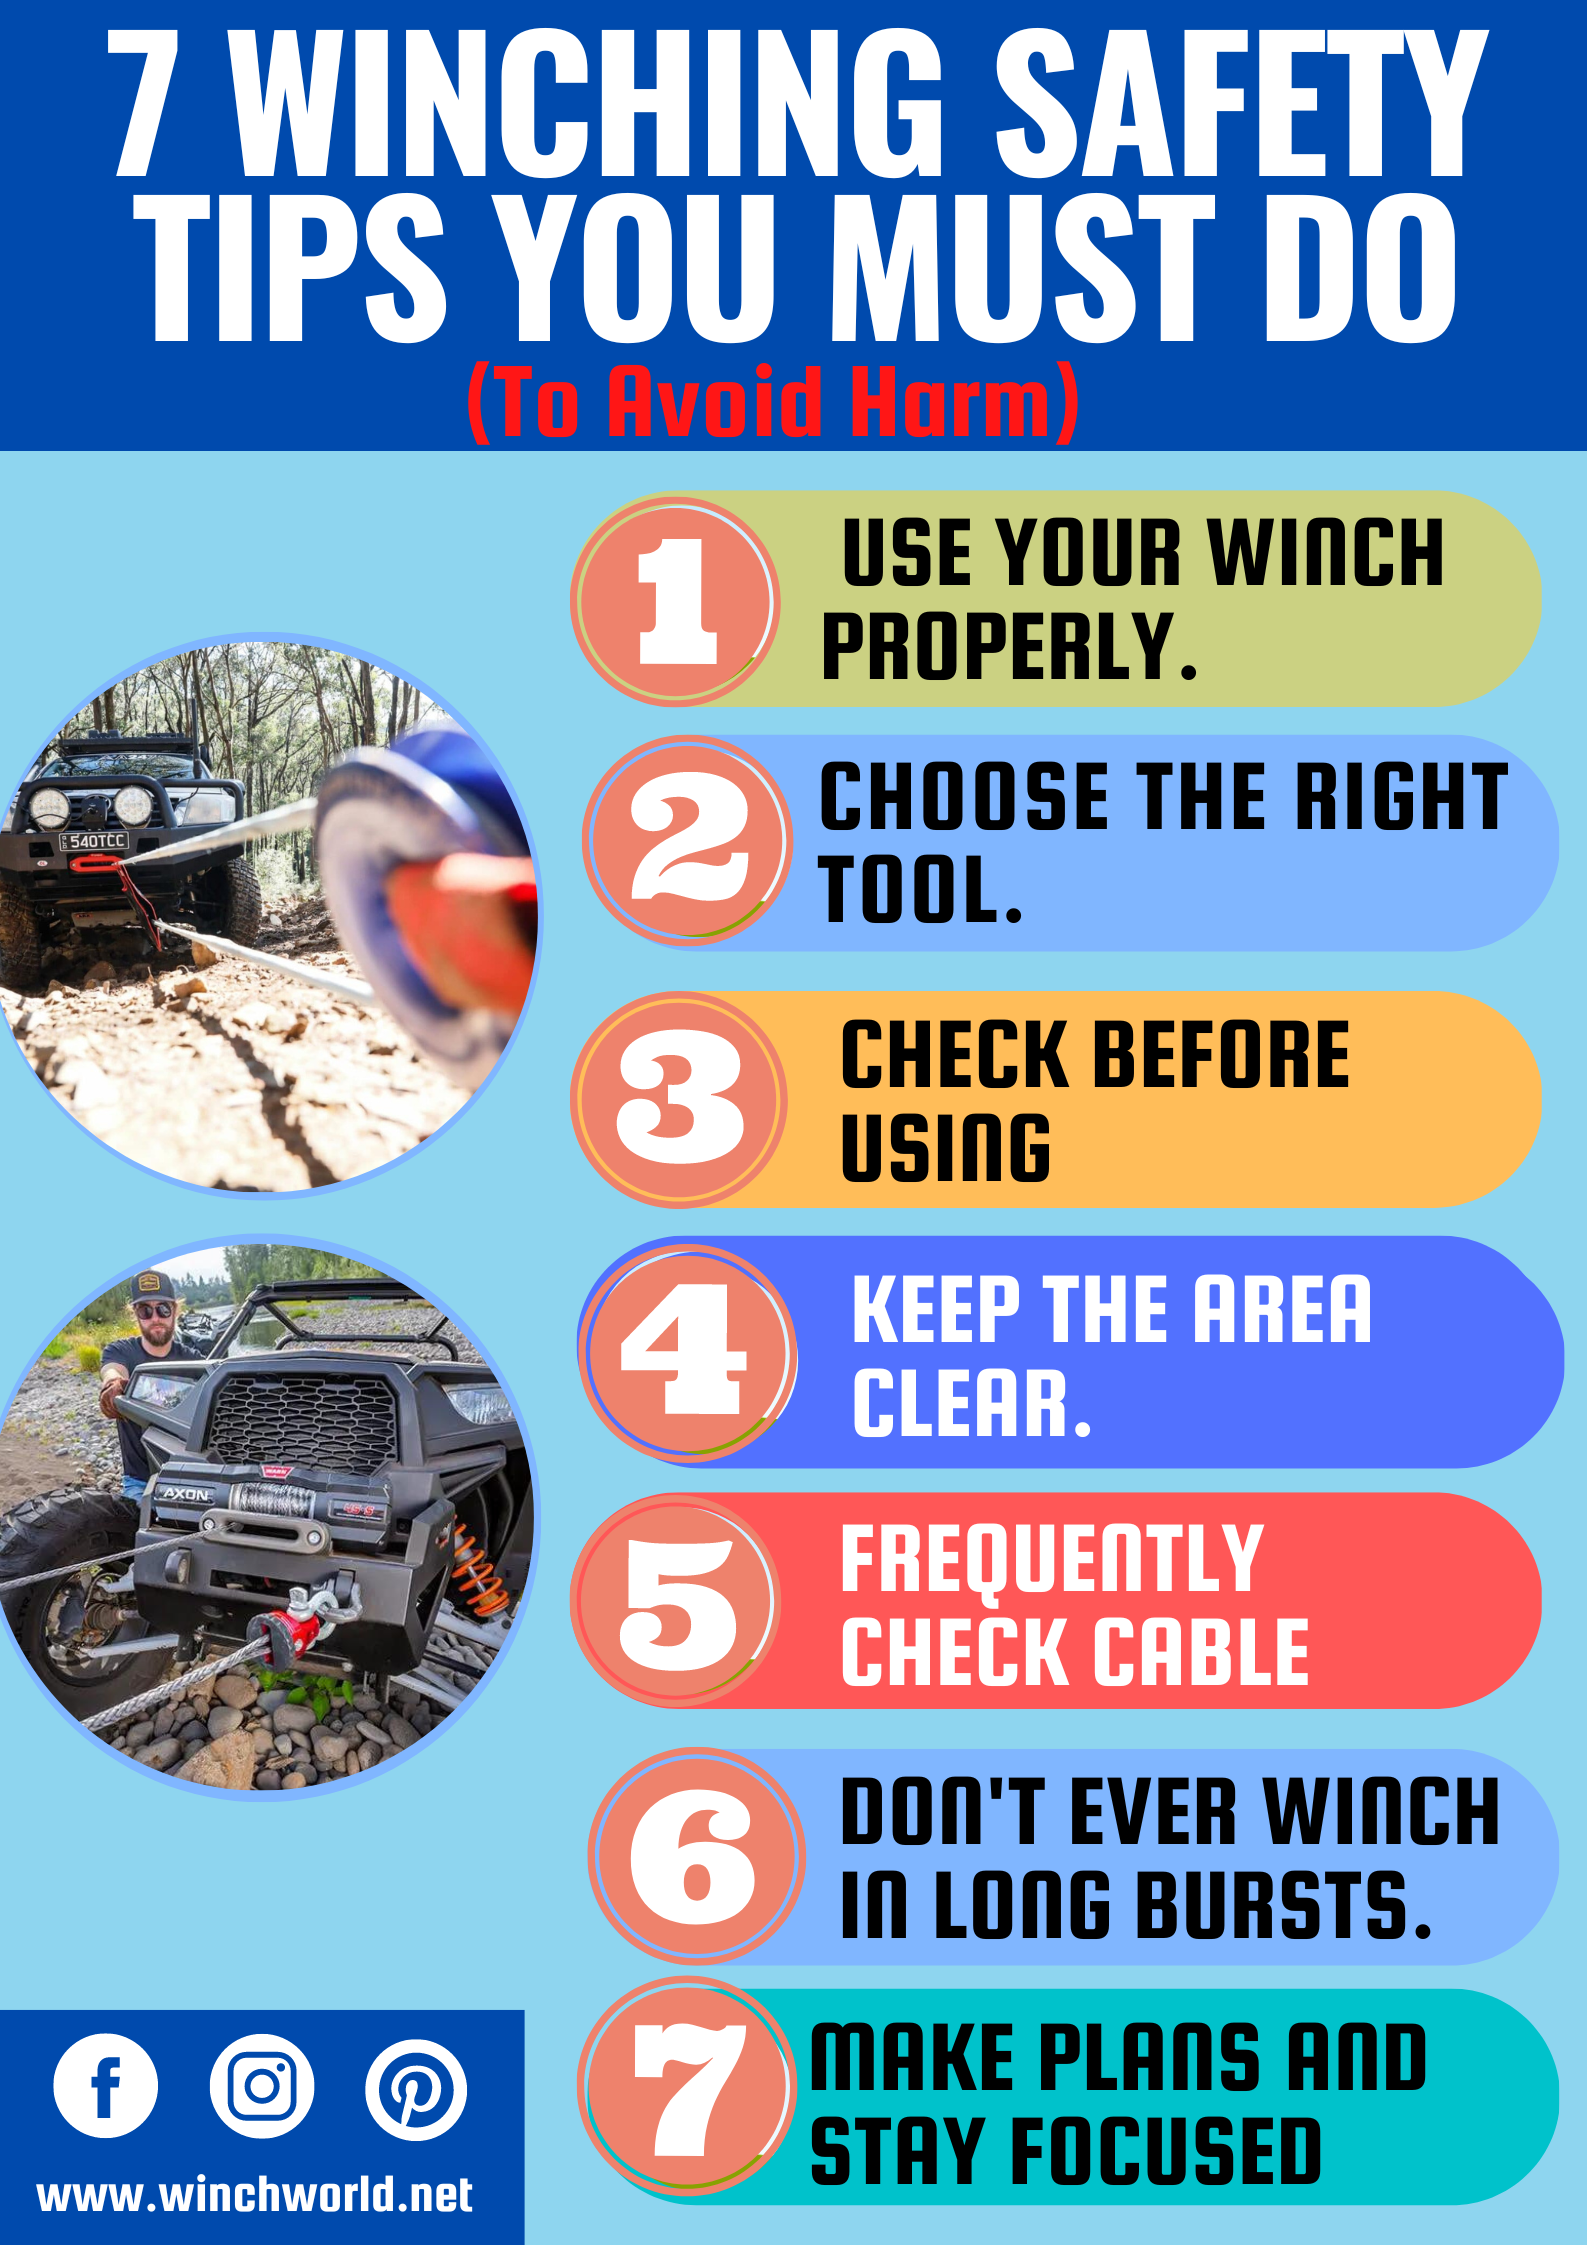 7 WINCHING SAFETY TIPS YOU MUST DO